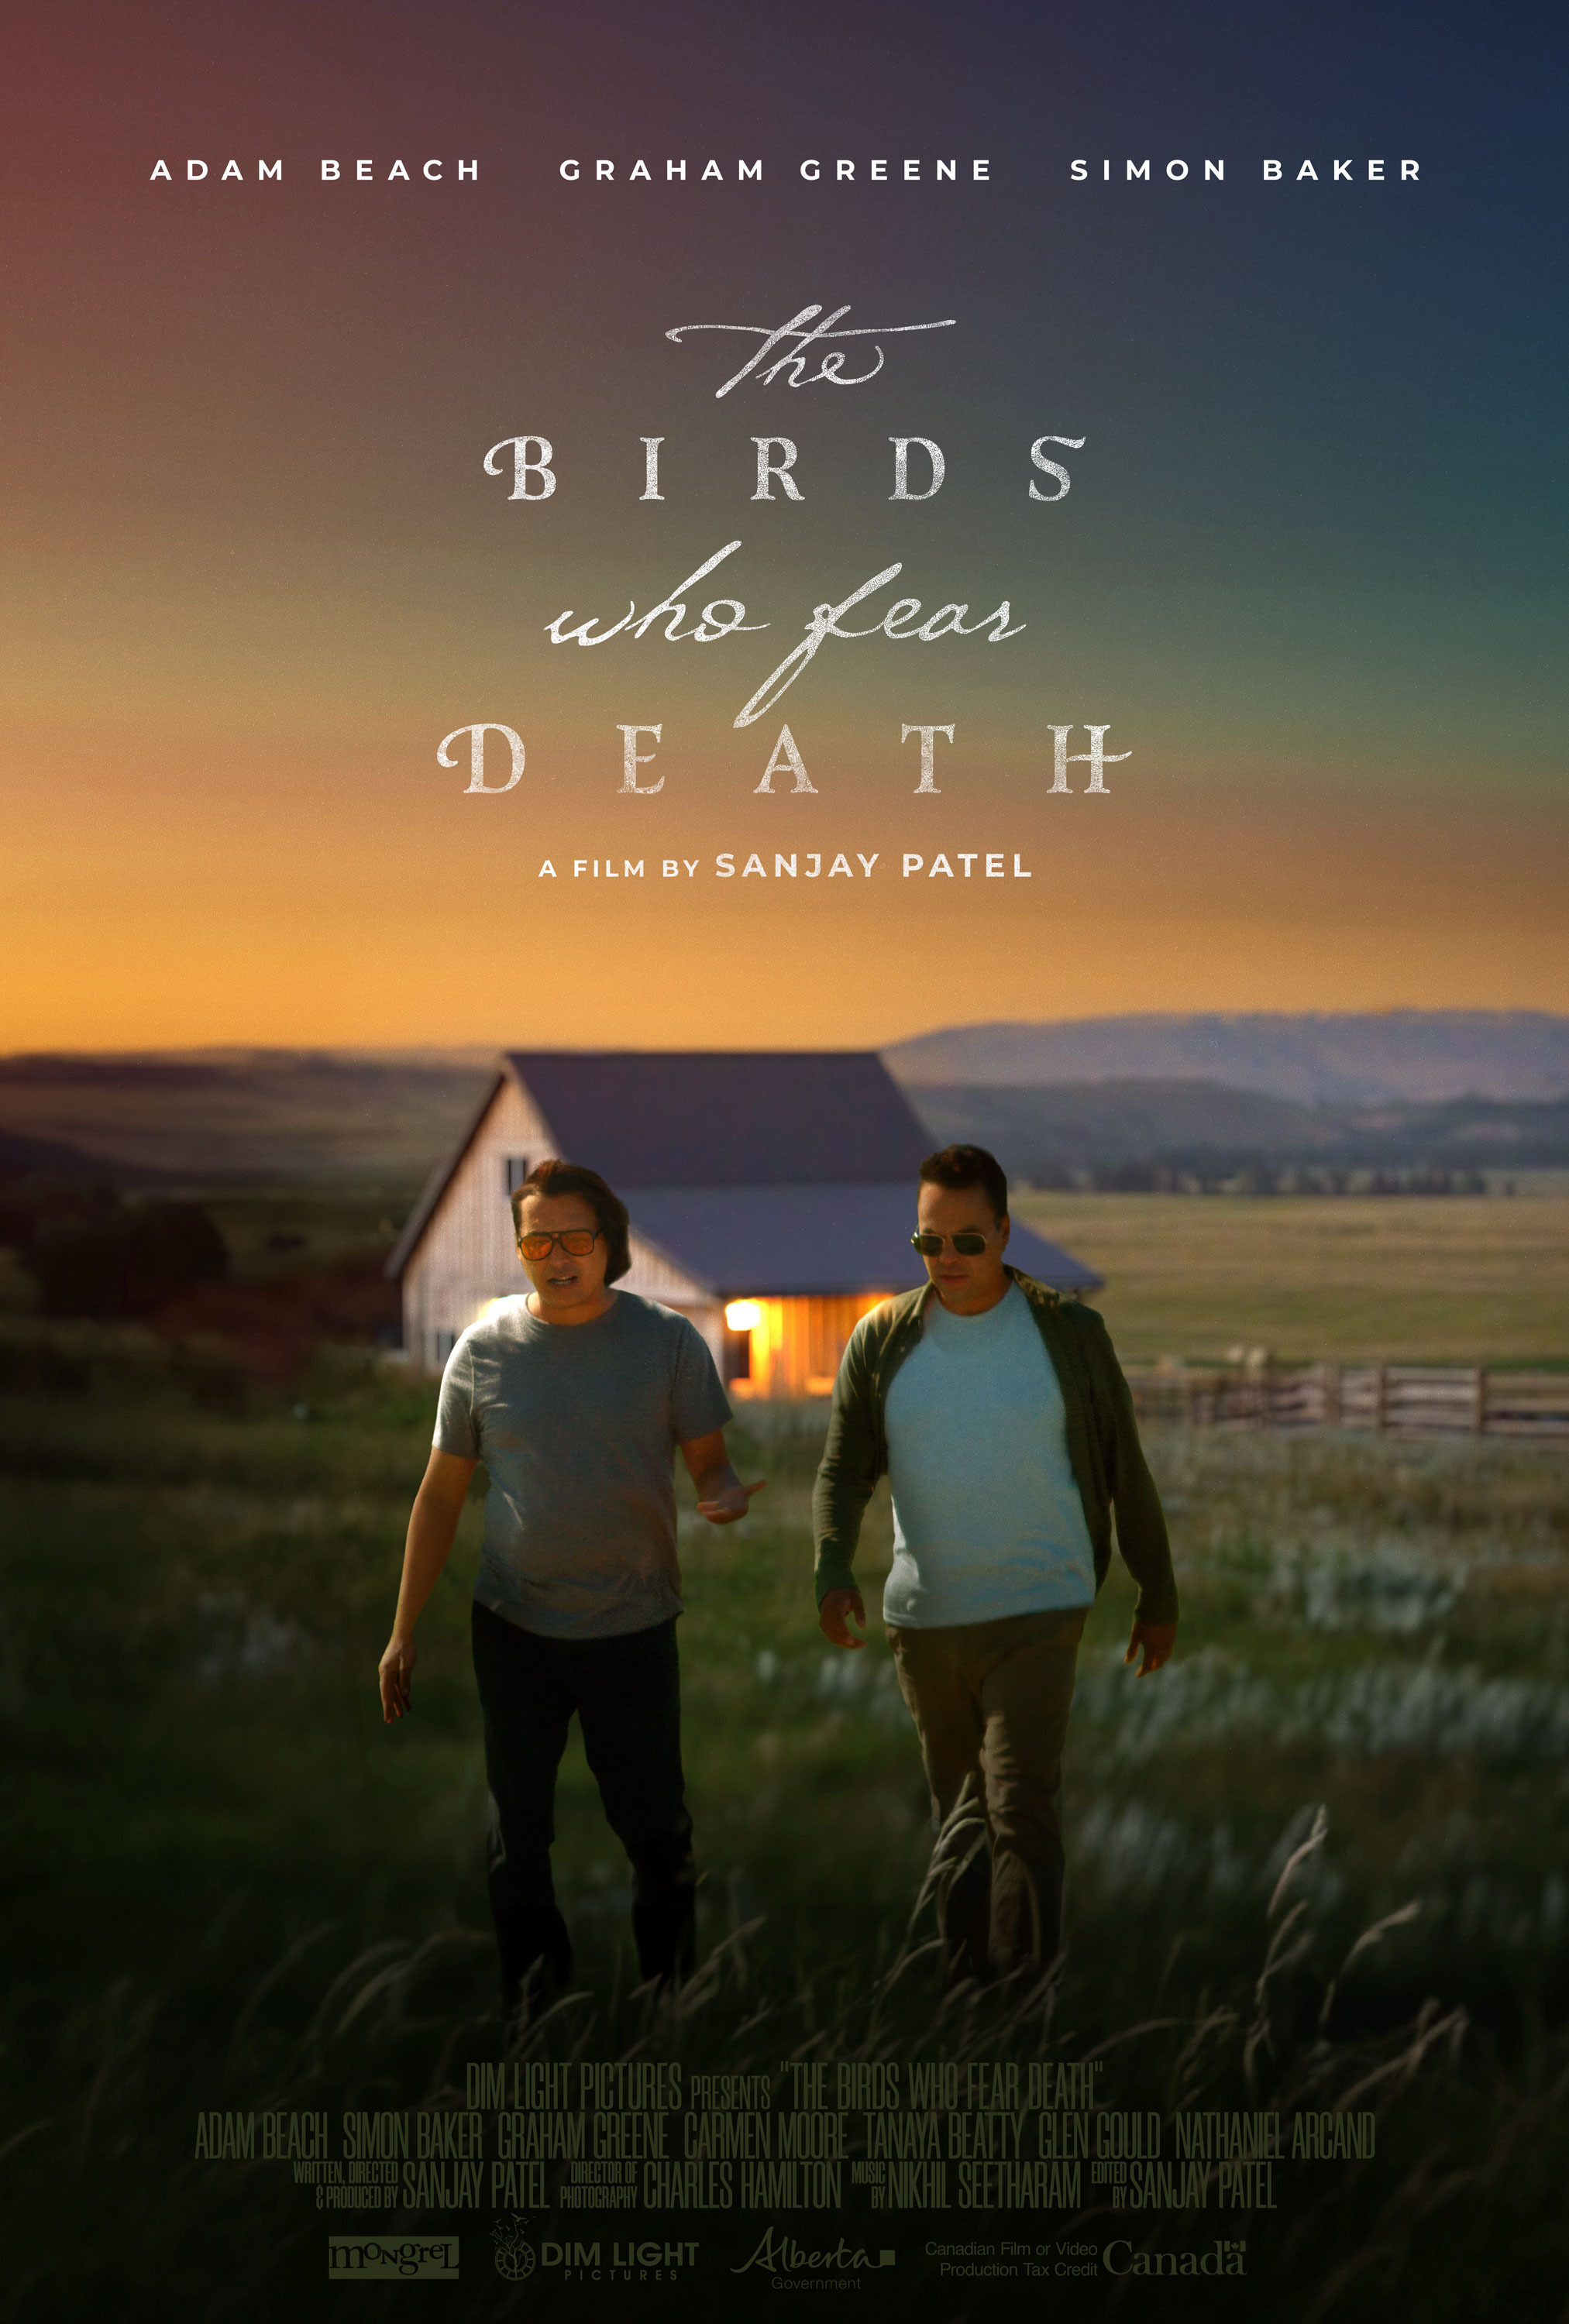 Mega Sized Movie Poster Image for The Birds Who Fear Death 